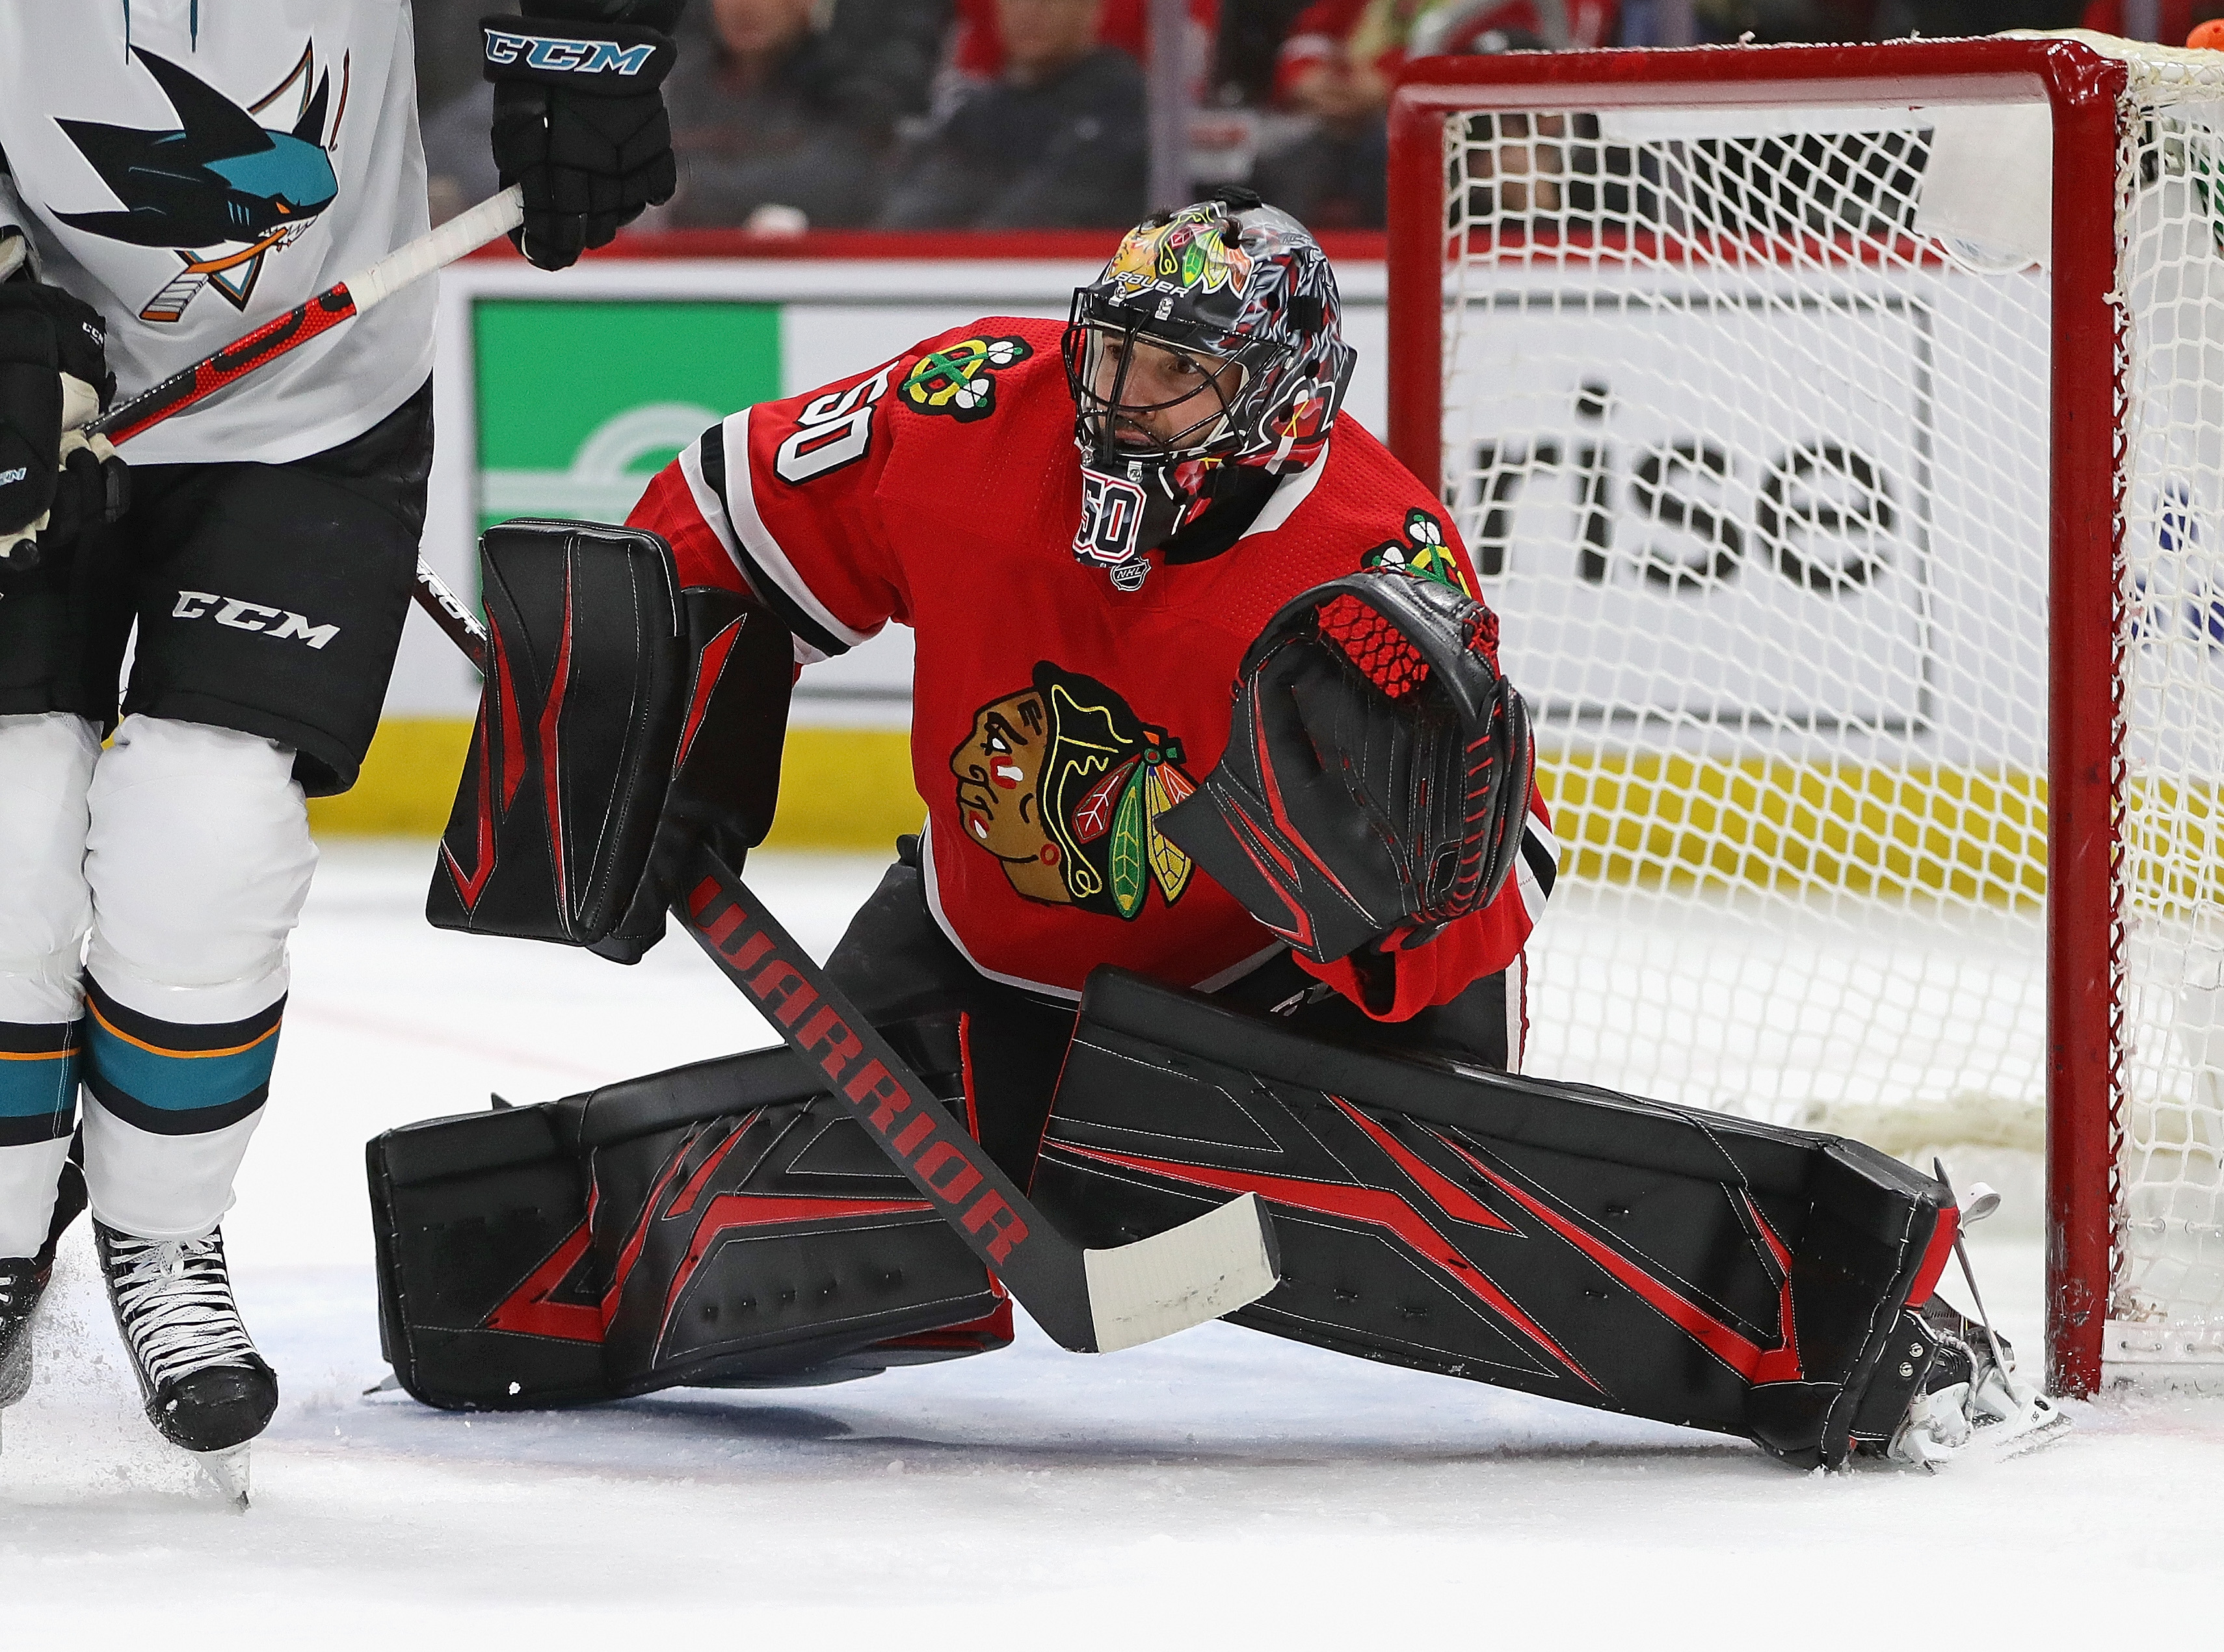 Corey Crawford's Potential Absence Impacts New Jersey Devils' Plans